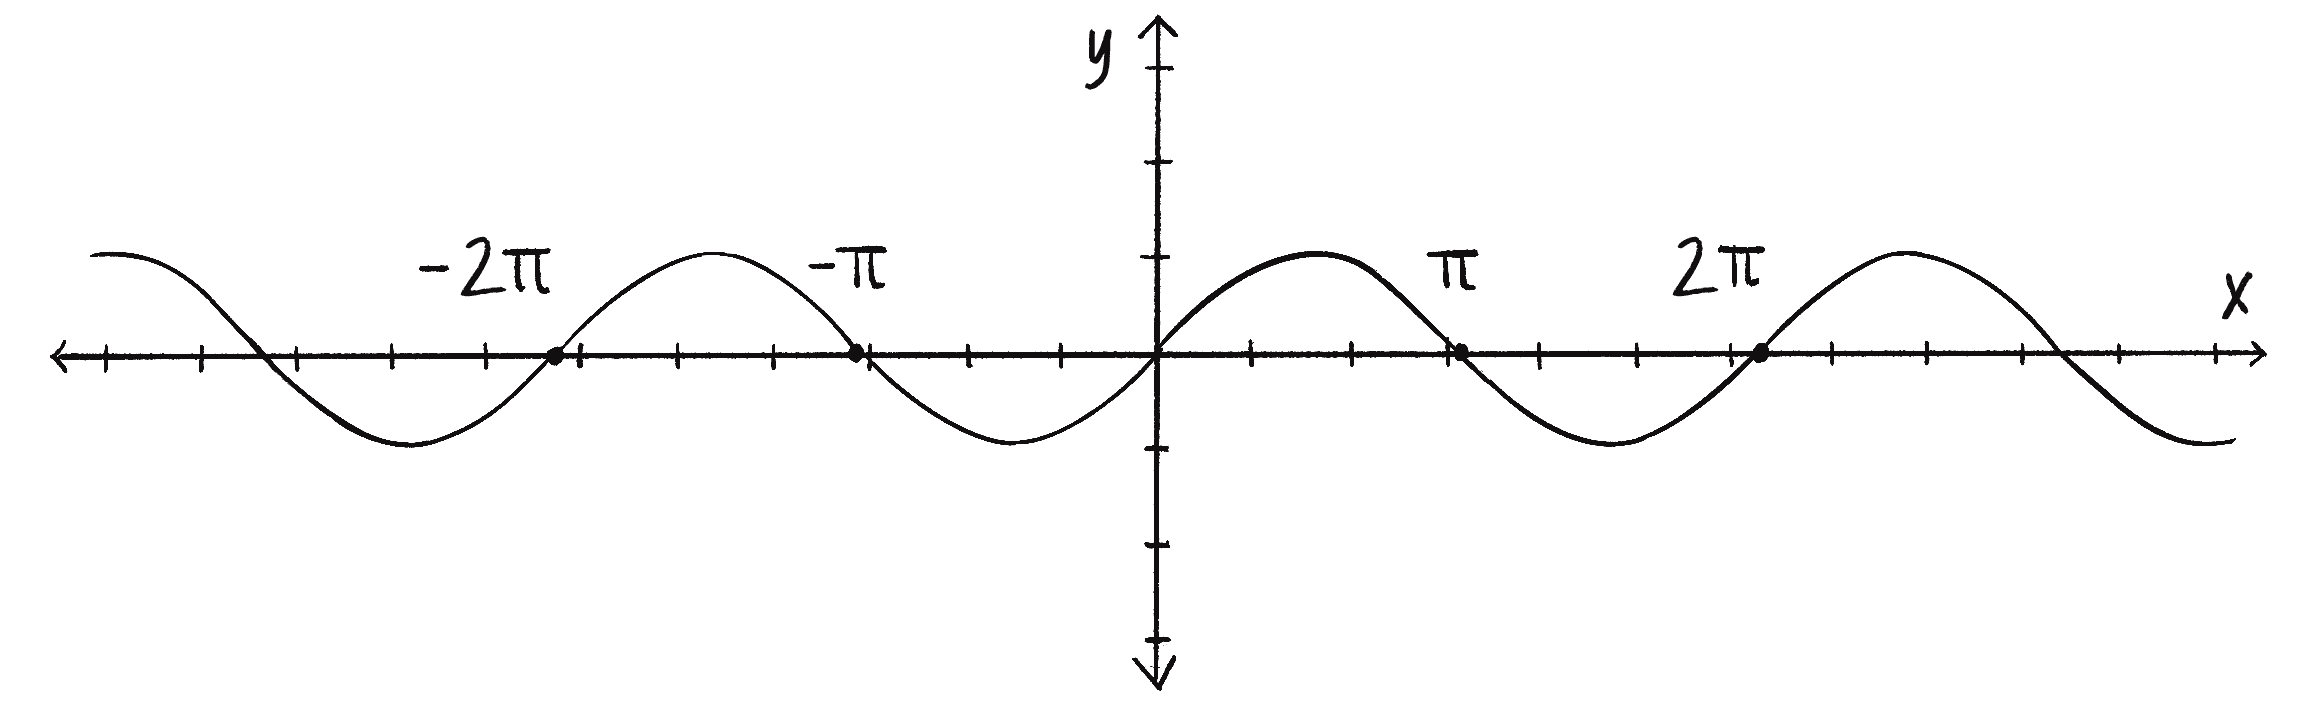 Figure 3.10: A graph of y = sin(x)